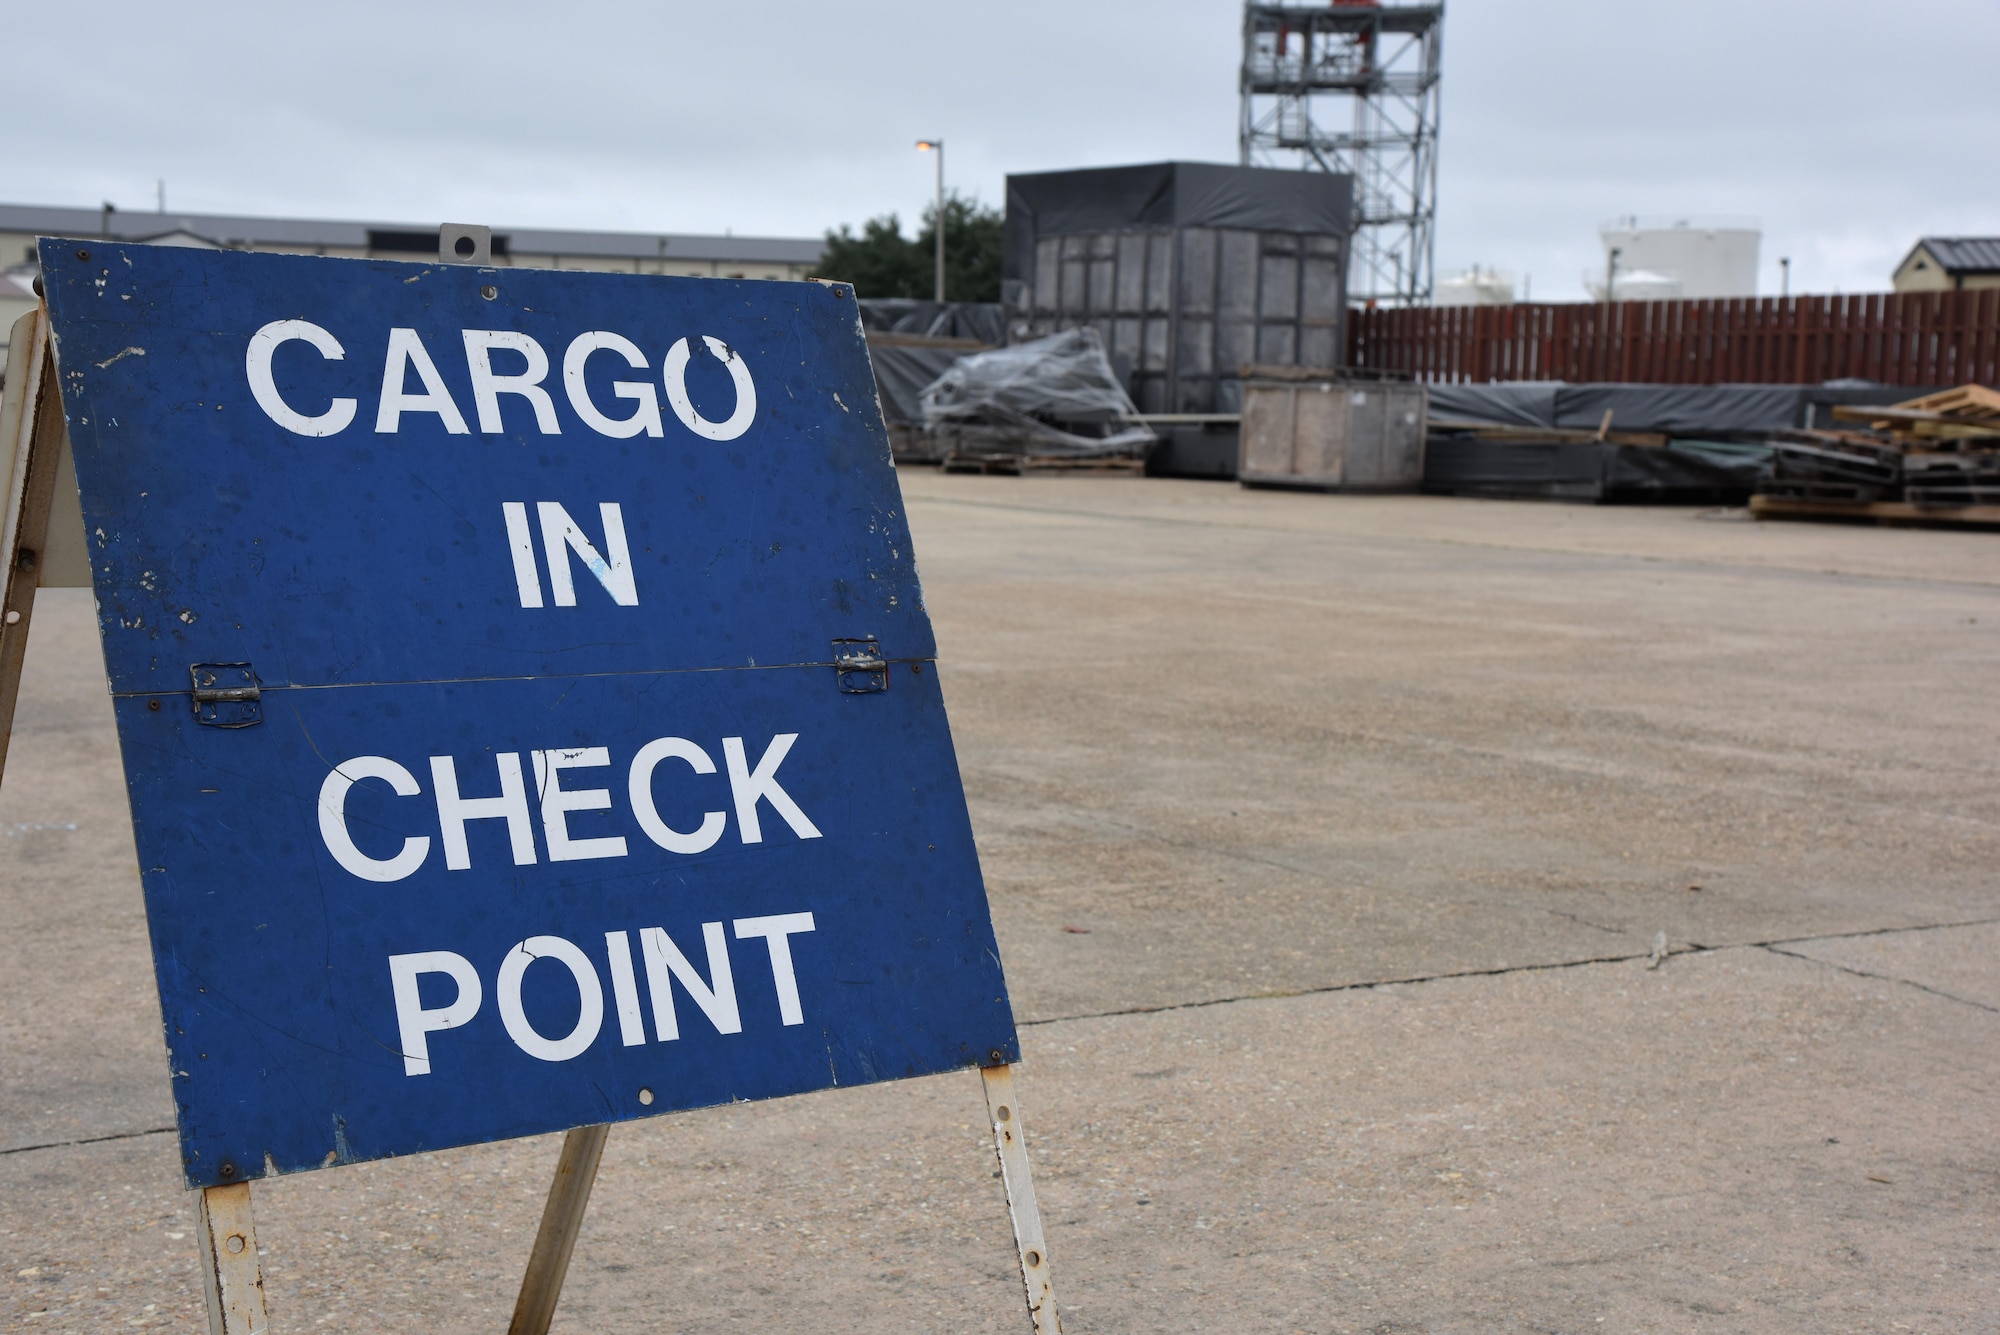 A cargo In check point sign sits at the supply warehouse loading docks during a deployment exercise Dec. 7, 2016, on Keesler Air Force Base, Miss. The exercise scenario tested the mission readiness of Team Keesler for simultaneous world-wide deployments. (U.S. Air Force photo by Kemberly Groue)